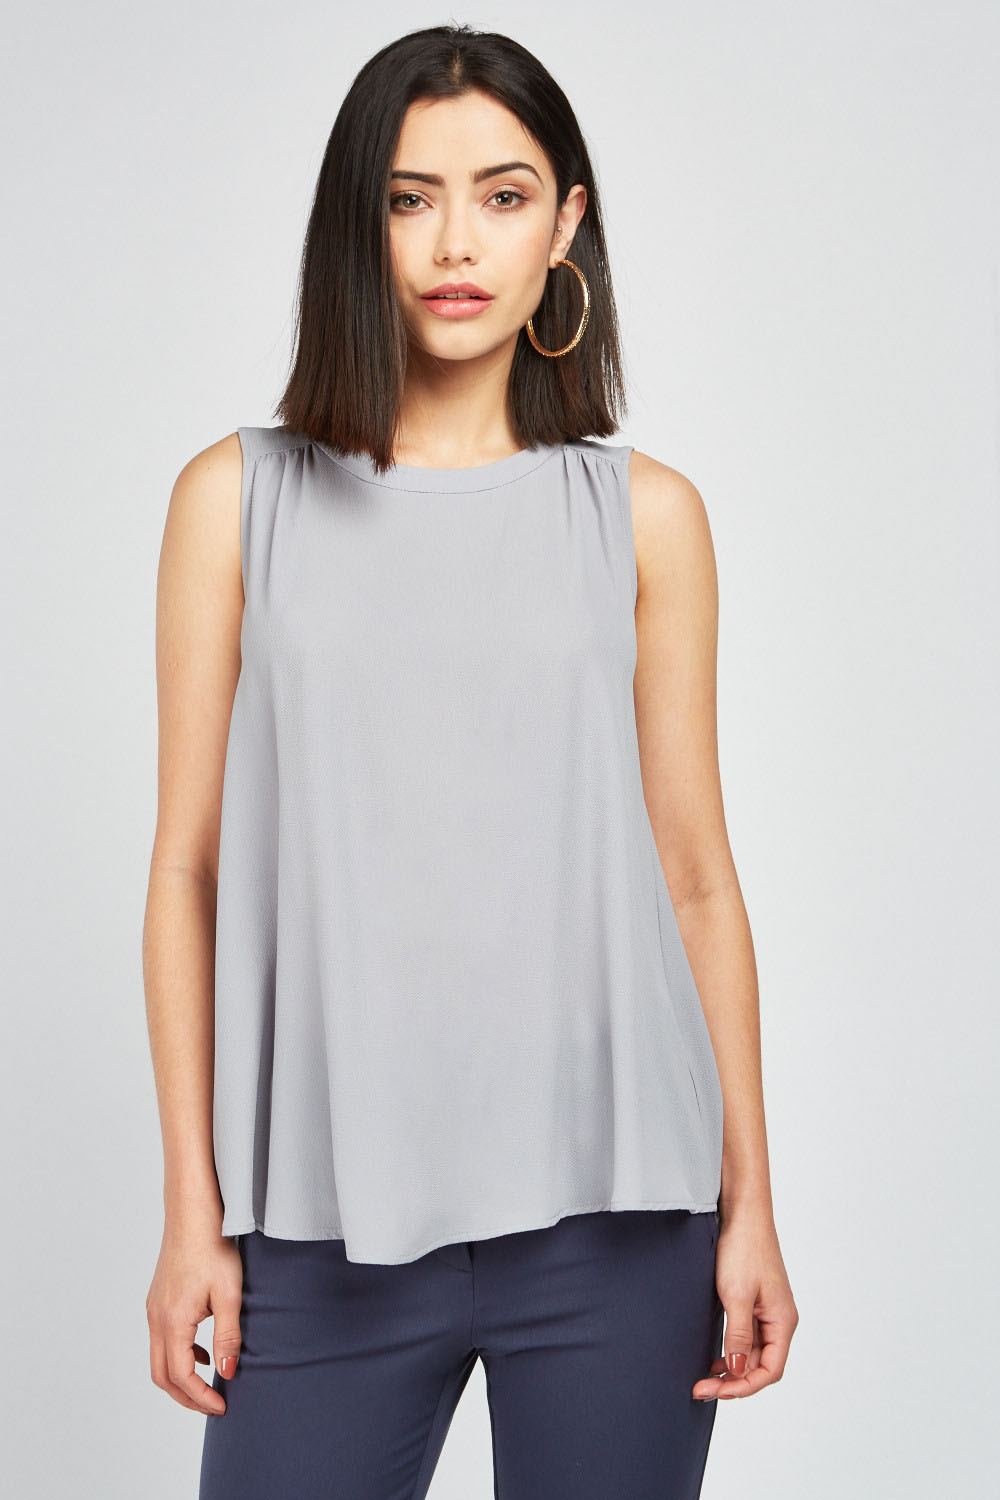 Wrap Back Sleeveless Top - Just $3